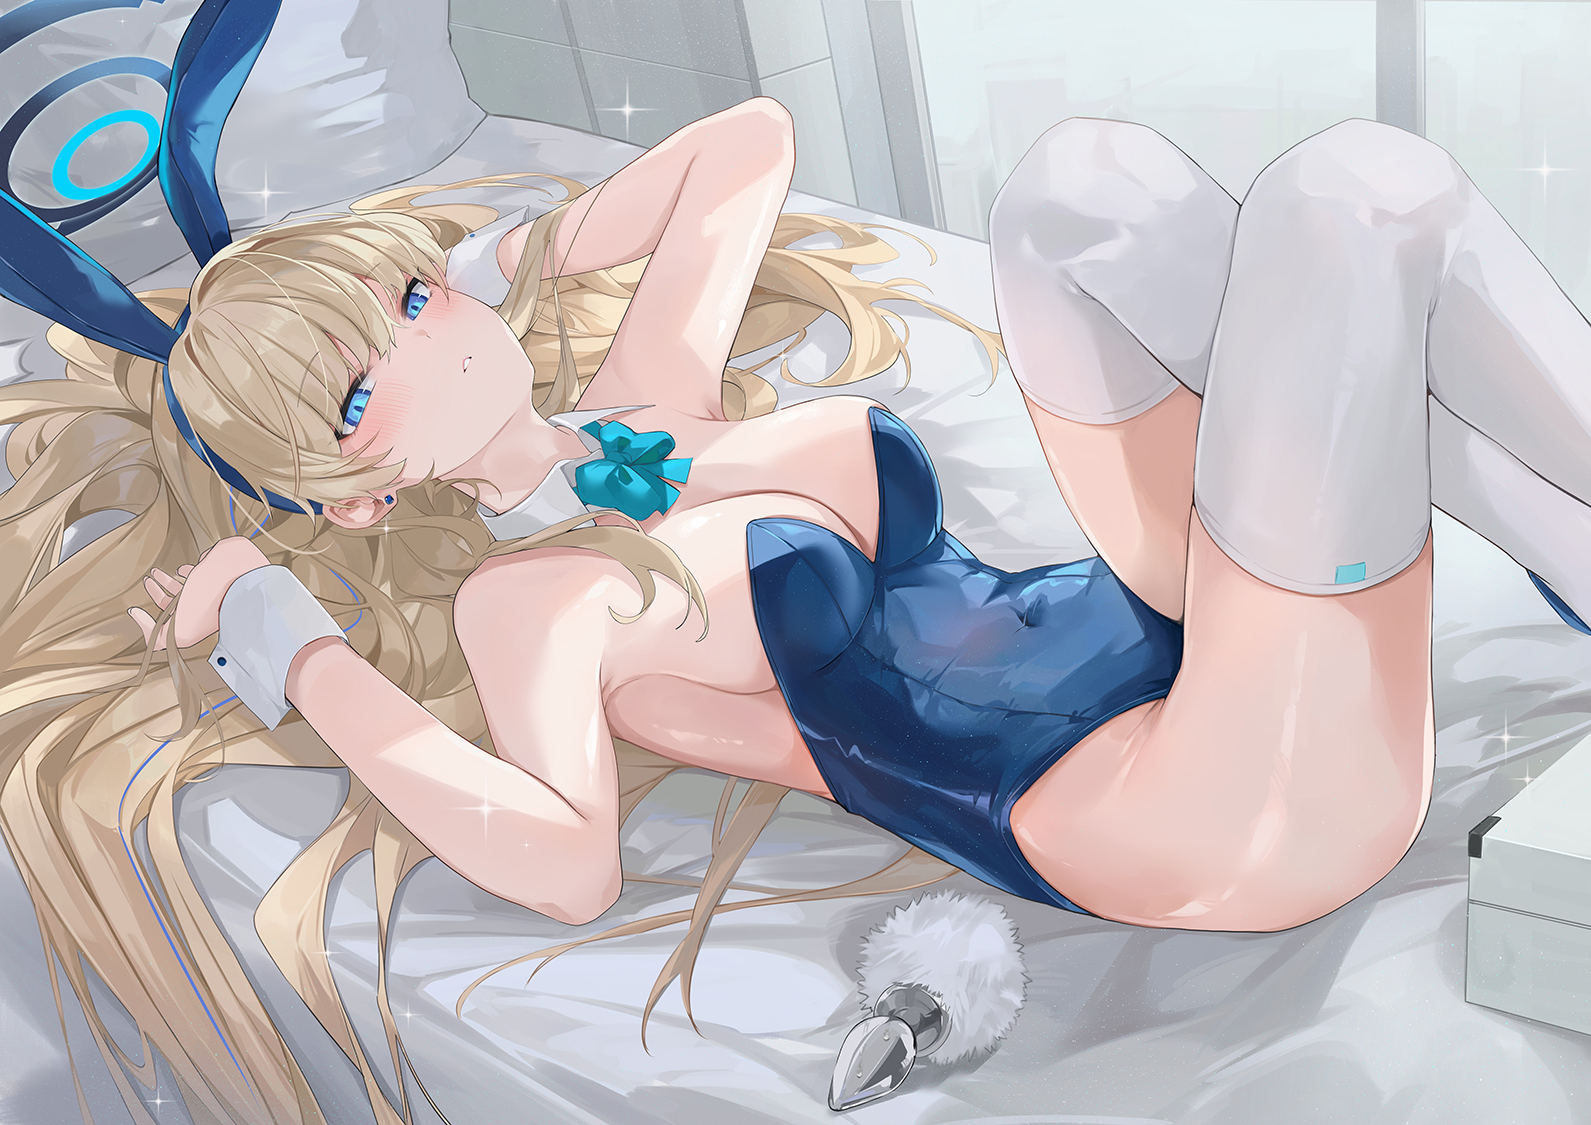 Anime 1591x1125 Asuma Toki (Blue Archive) Blue Archive Dema Hmw bunny girl white stockings blue leotard leotard lying down lying on back looking at viewer blue eyes bunny suit bunny ears bow tie big boobs stockings long hair blonde blushing thighs stars bed pillow ear piercing